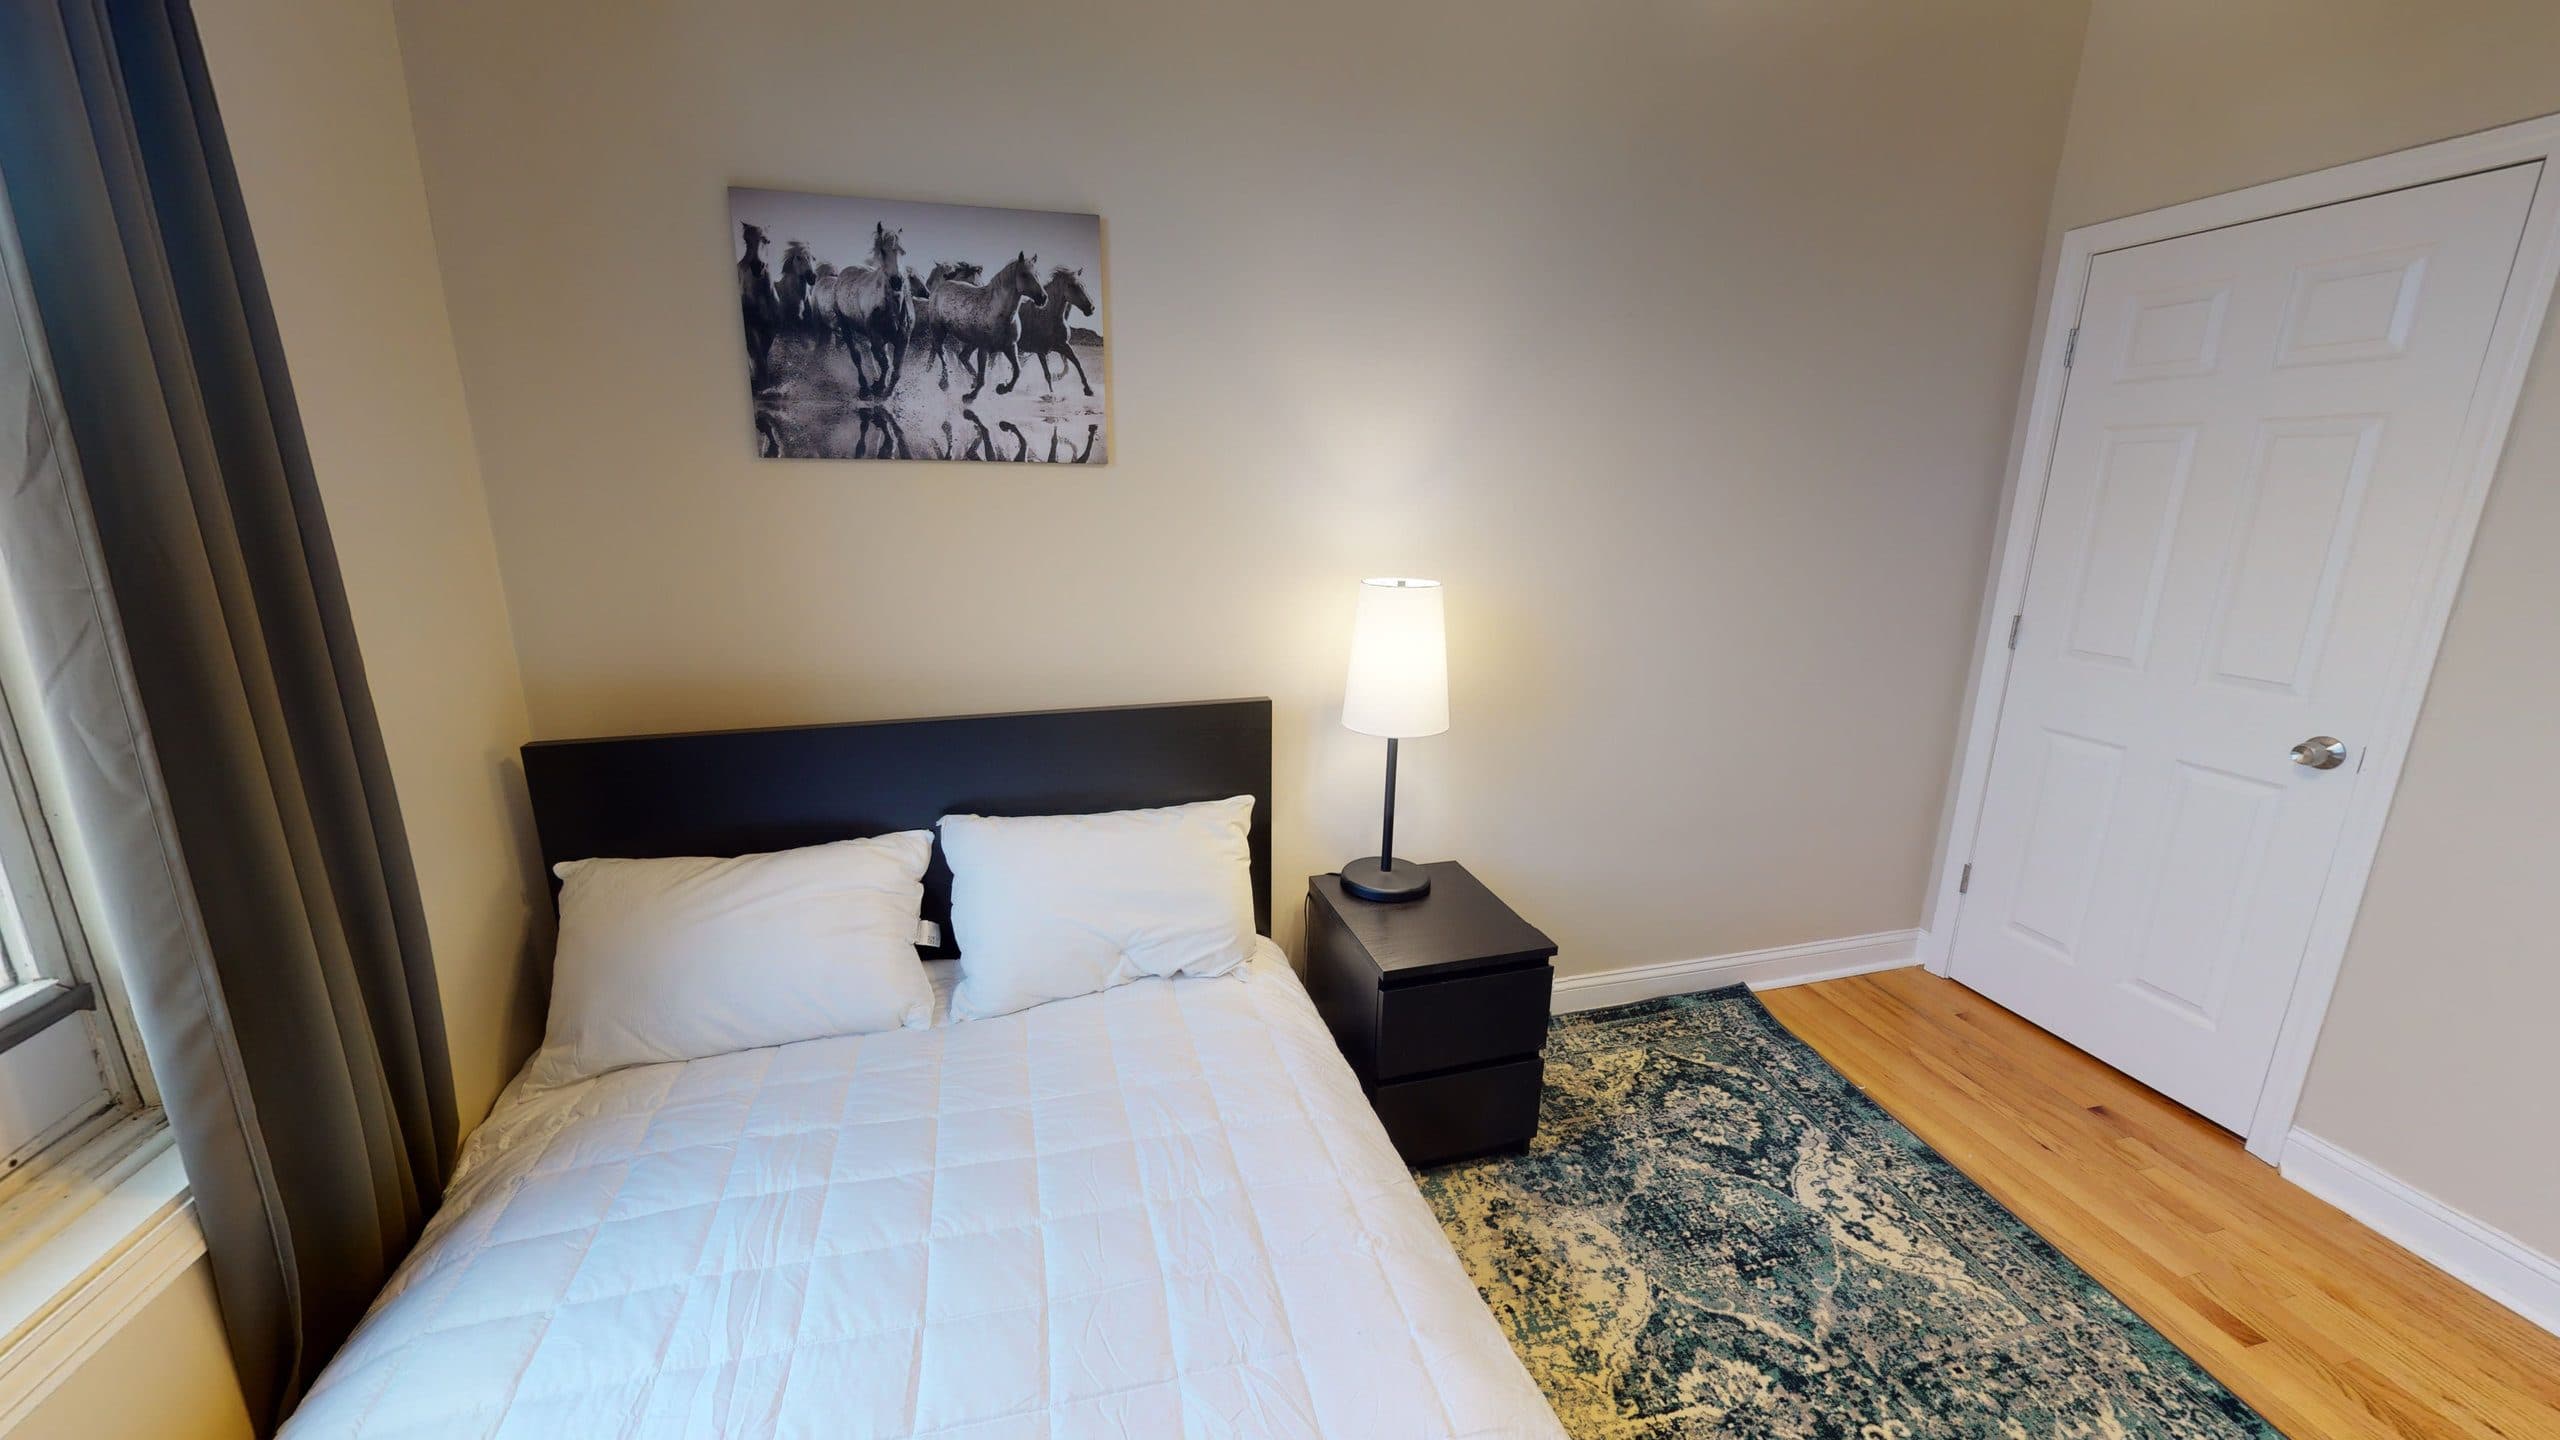 Photo 2 of #1159: Queen Bedroom A at June Homes